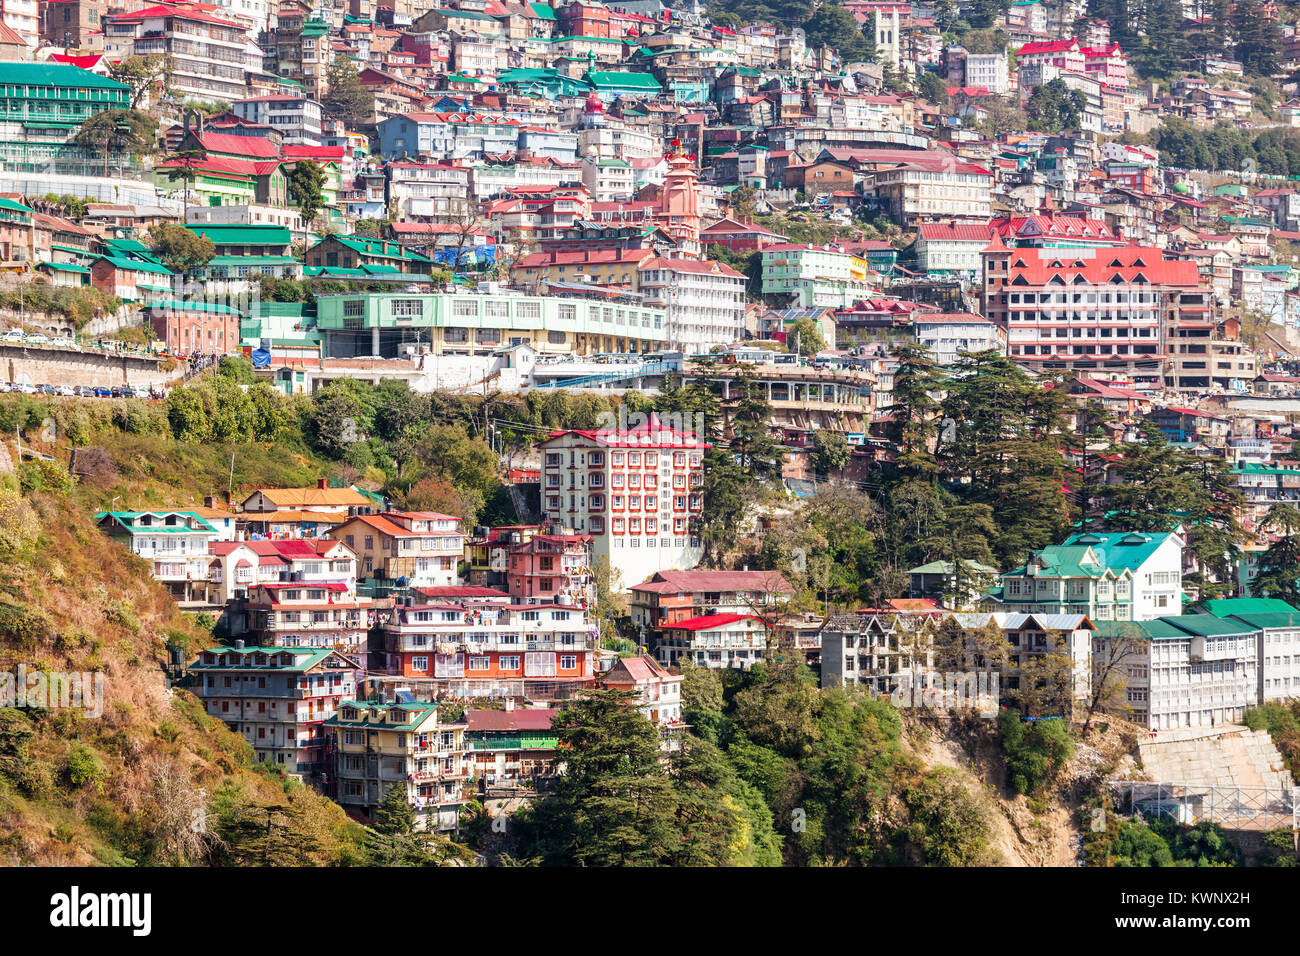 Shimla aerial view, it is the capital city of the Indian state of Himachal Pradesh, located in northern India. Stock Photo